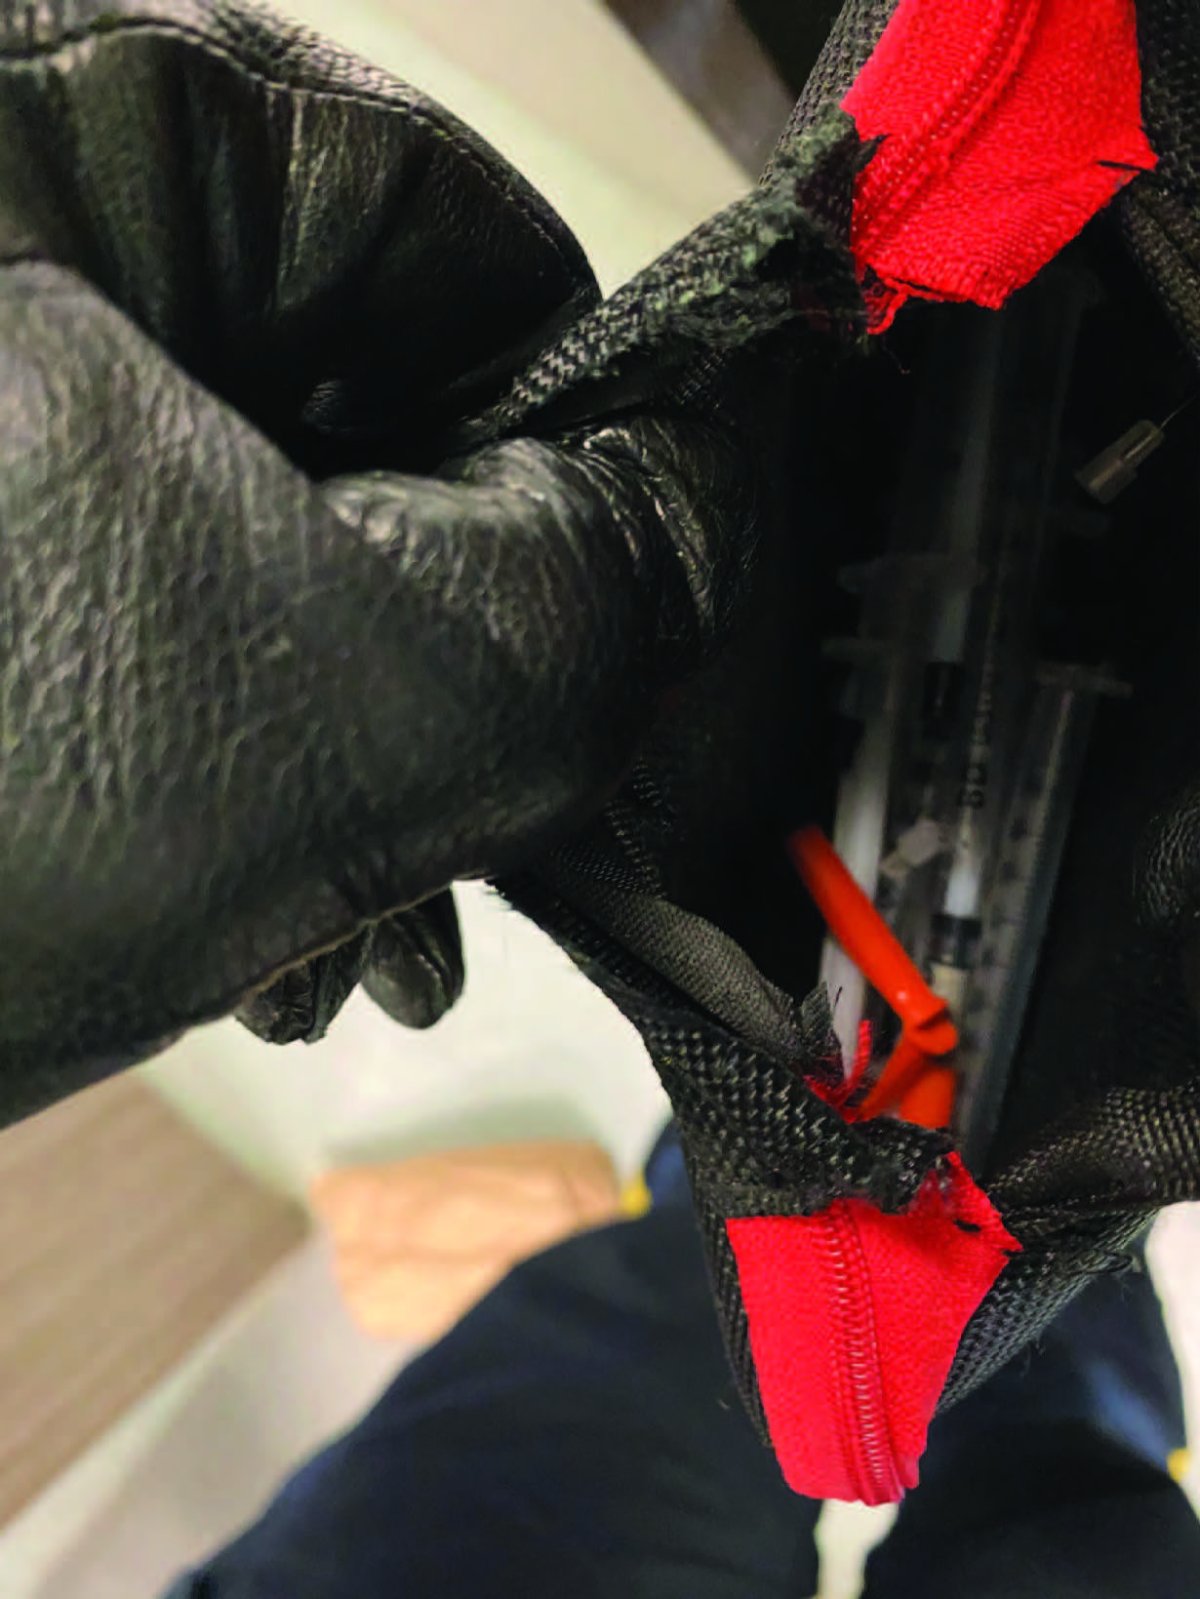 RCMP say a man tossed a bag of used needles at others.